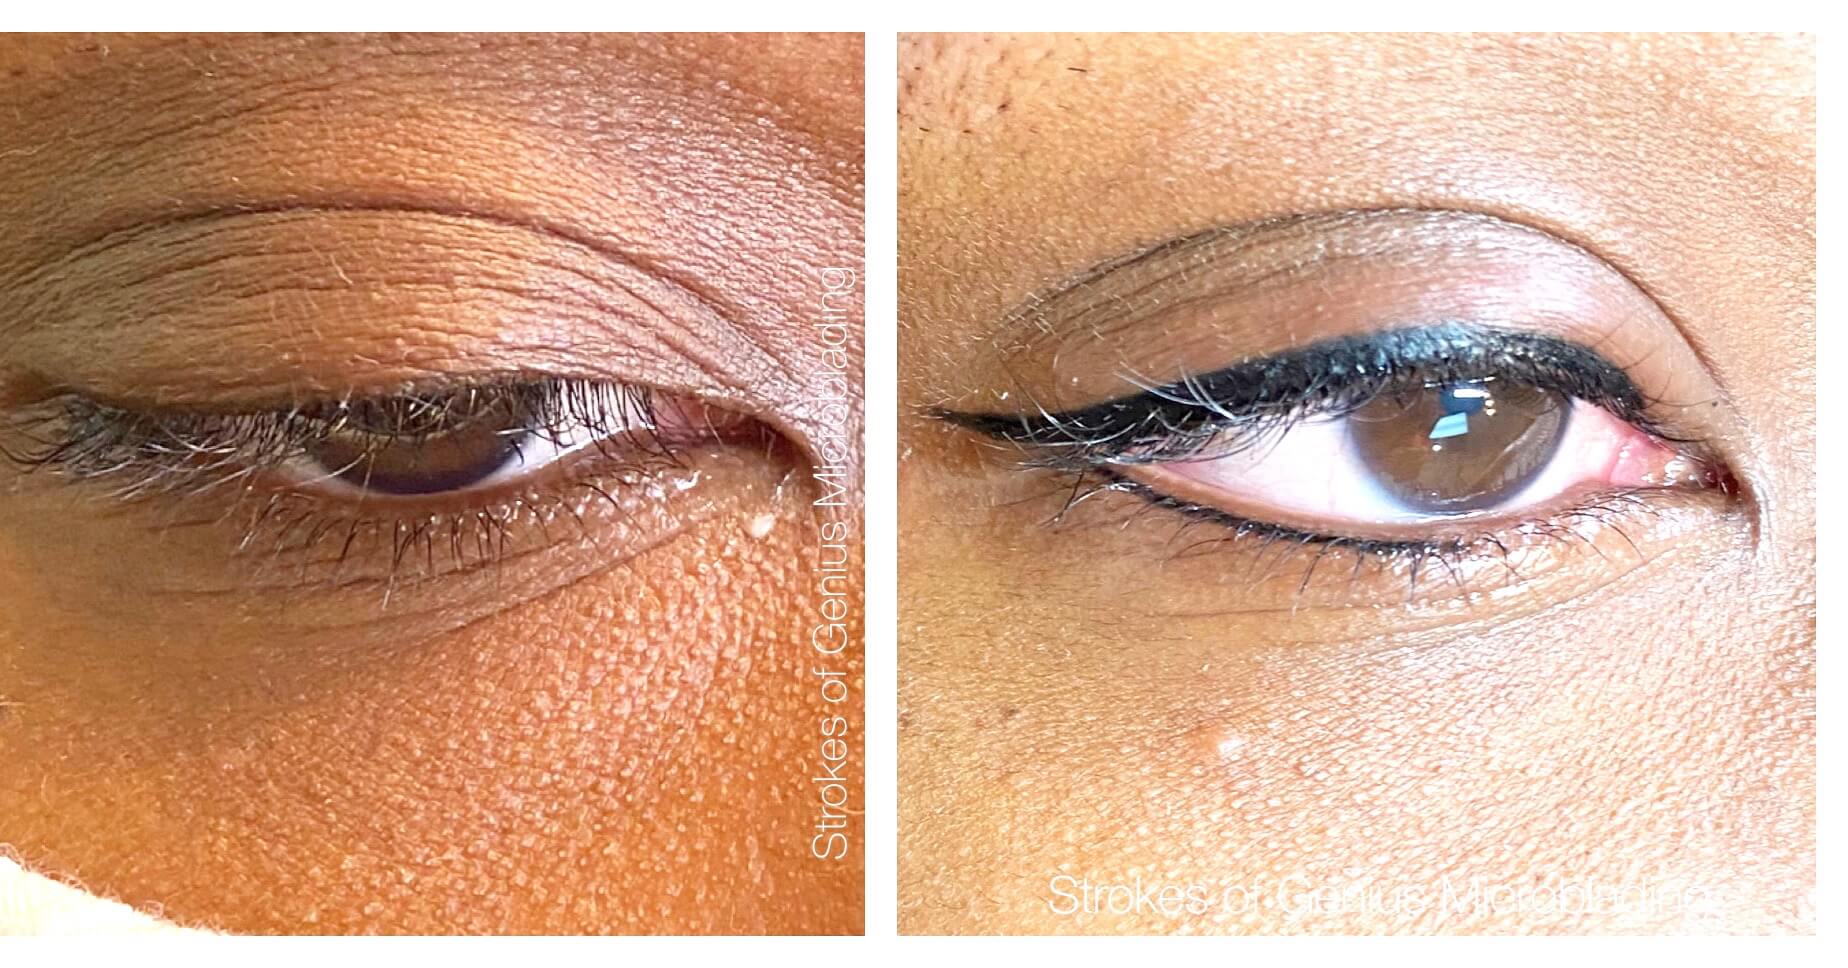 permanent eyeliner tattoo Archives - Strokes of Genius Microblading